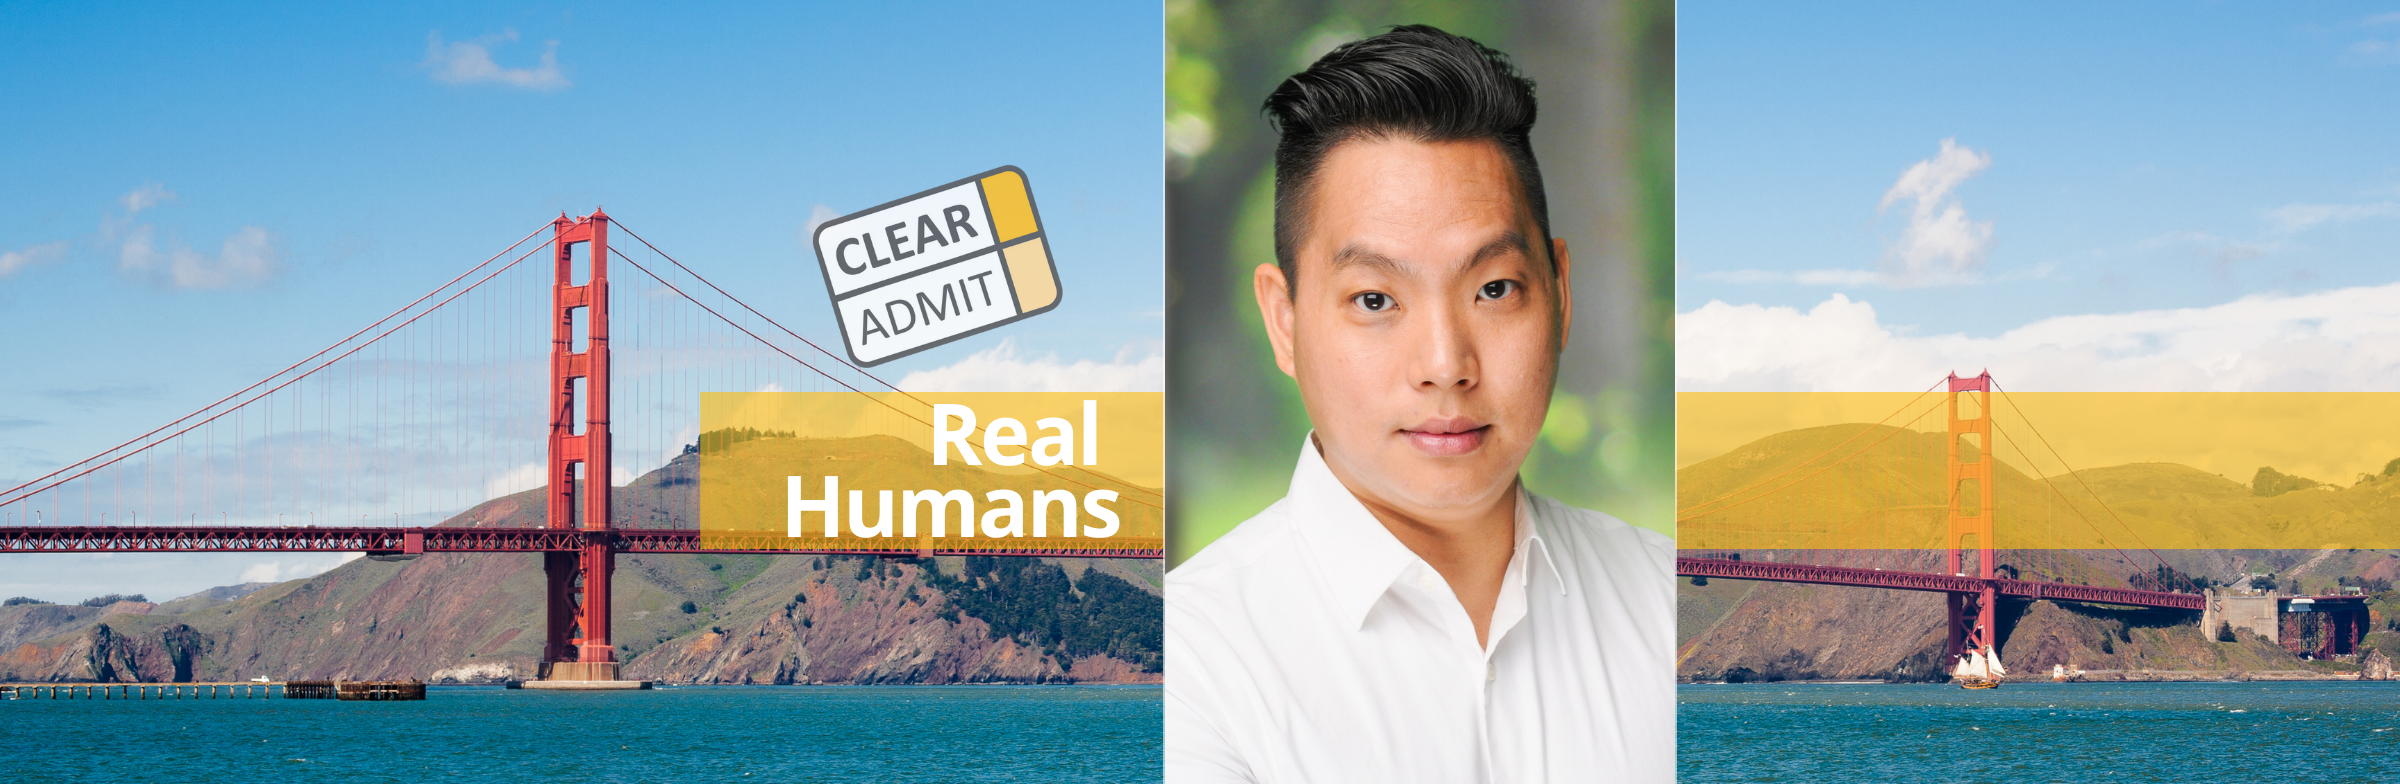 Image for Real Humans of Circle: Kidae Hong, NYU Stern MBA ’21, CEO and Co-Founder